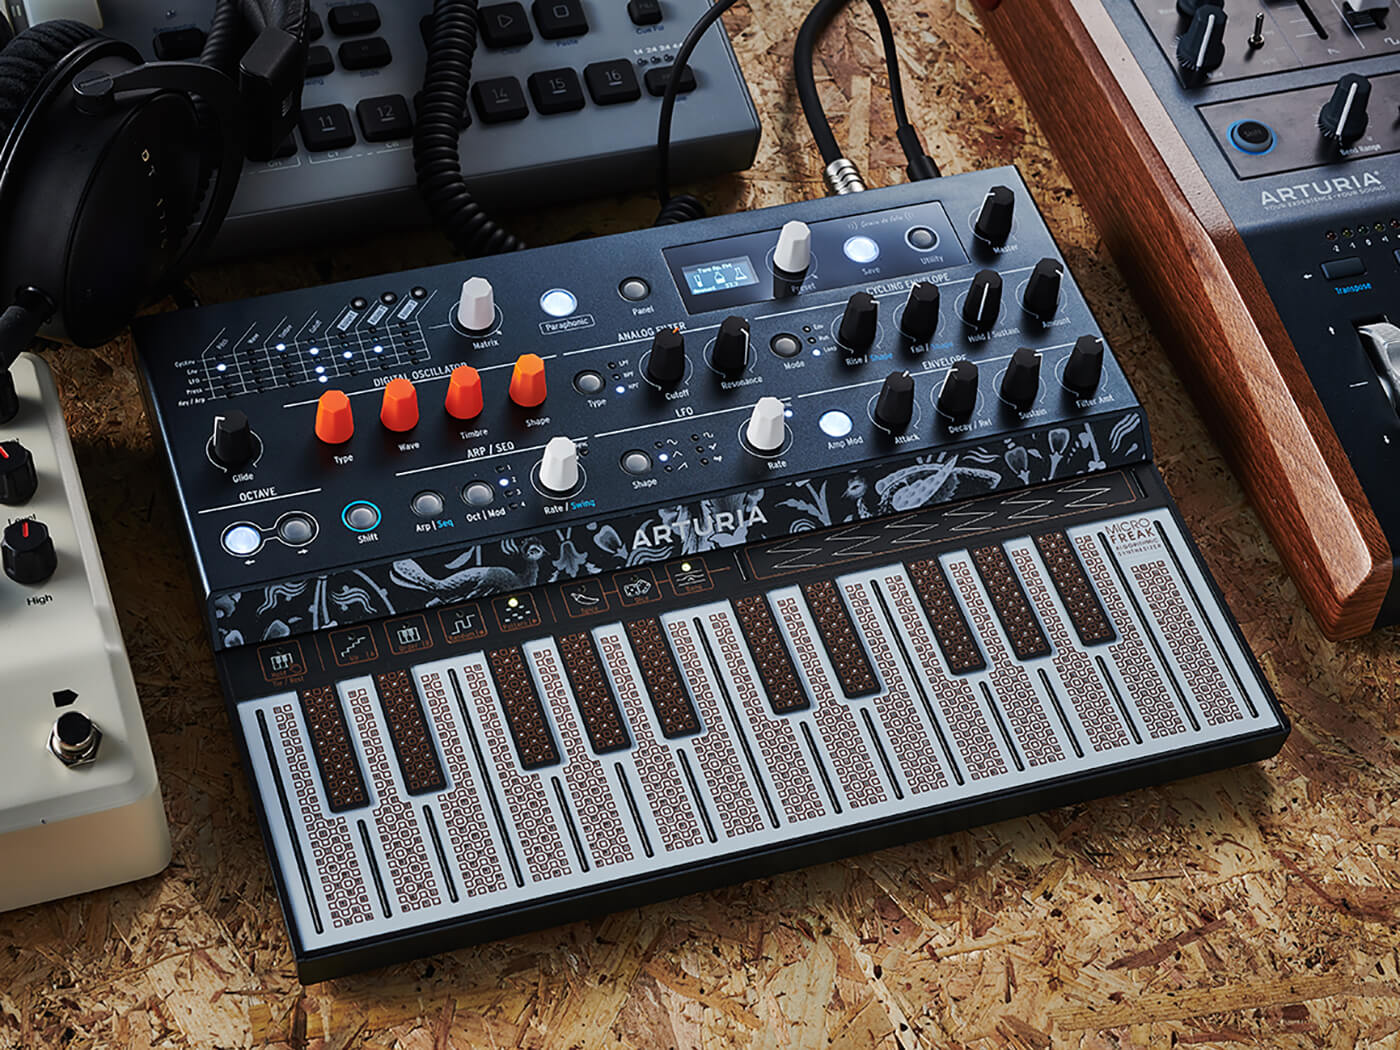 Arturia MicroFreak synthesizer, photo by Olly Curtis/Future Publishing via Getty Images